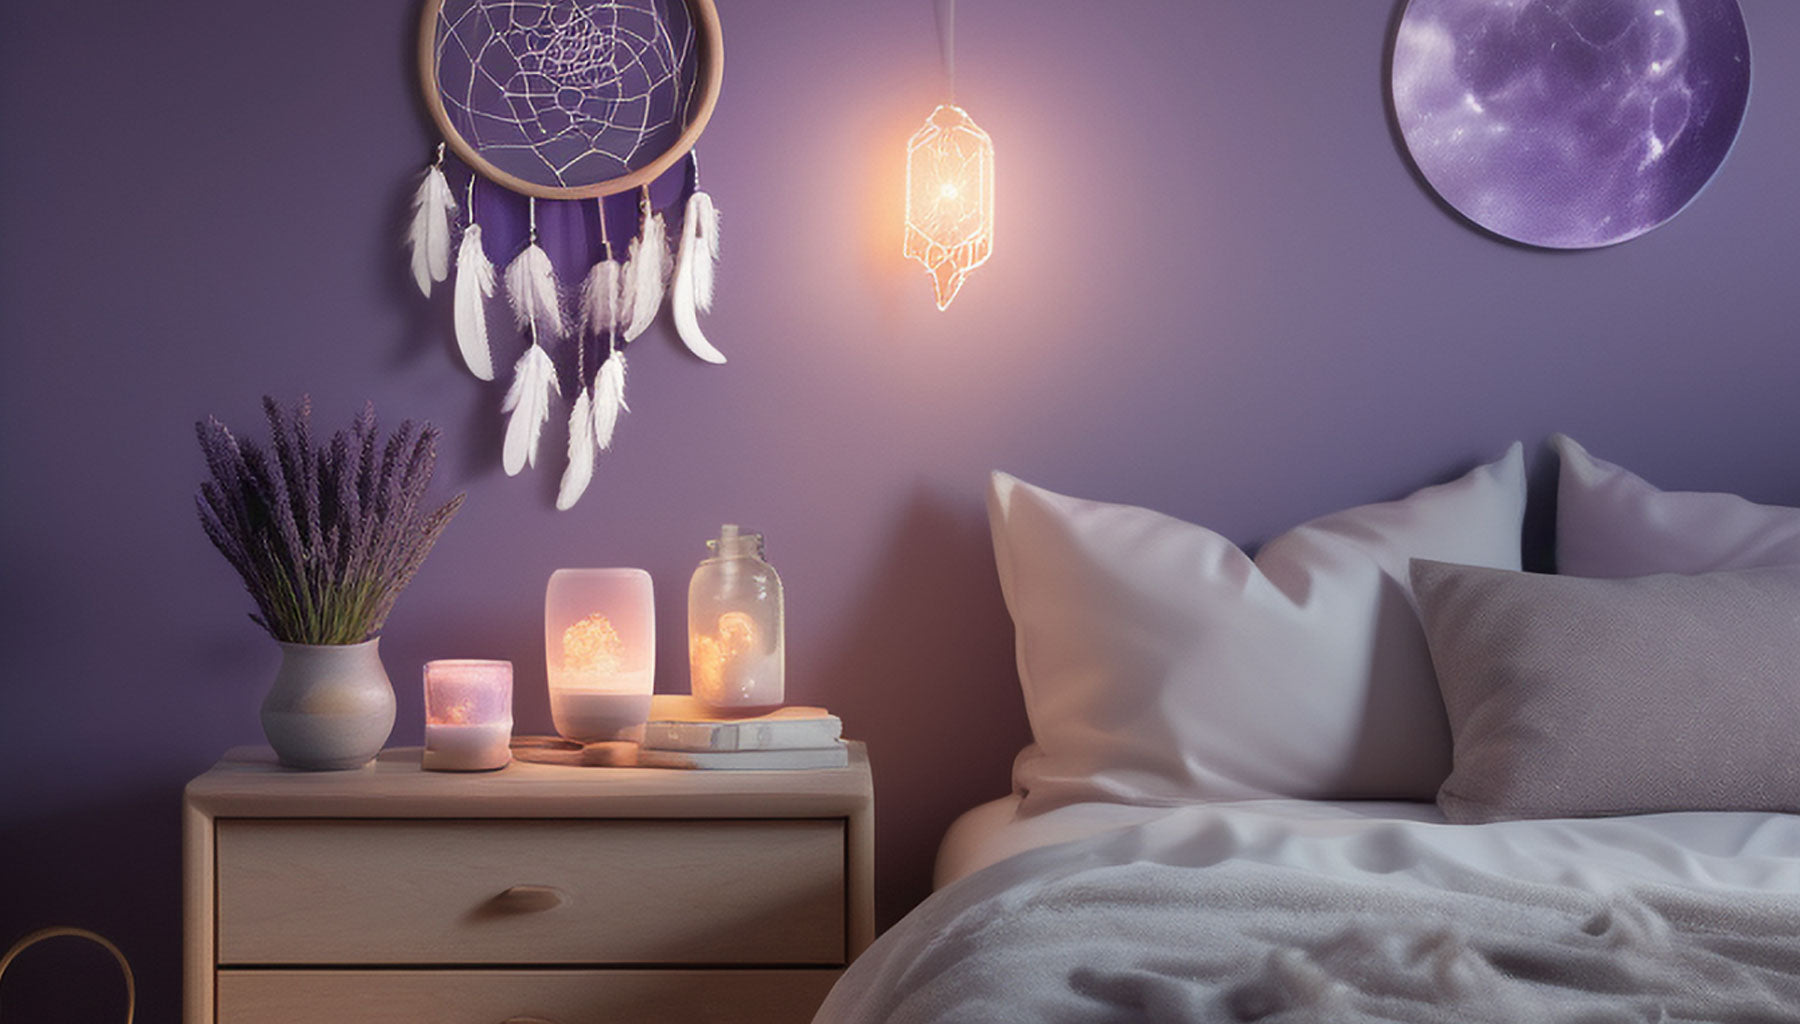 A moonlit bedroom, with soothing elements like lavender and a salt lamp.